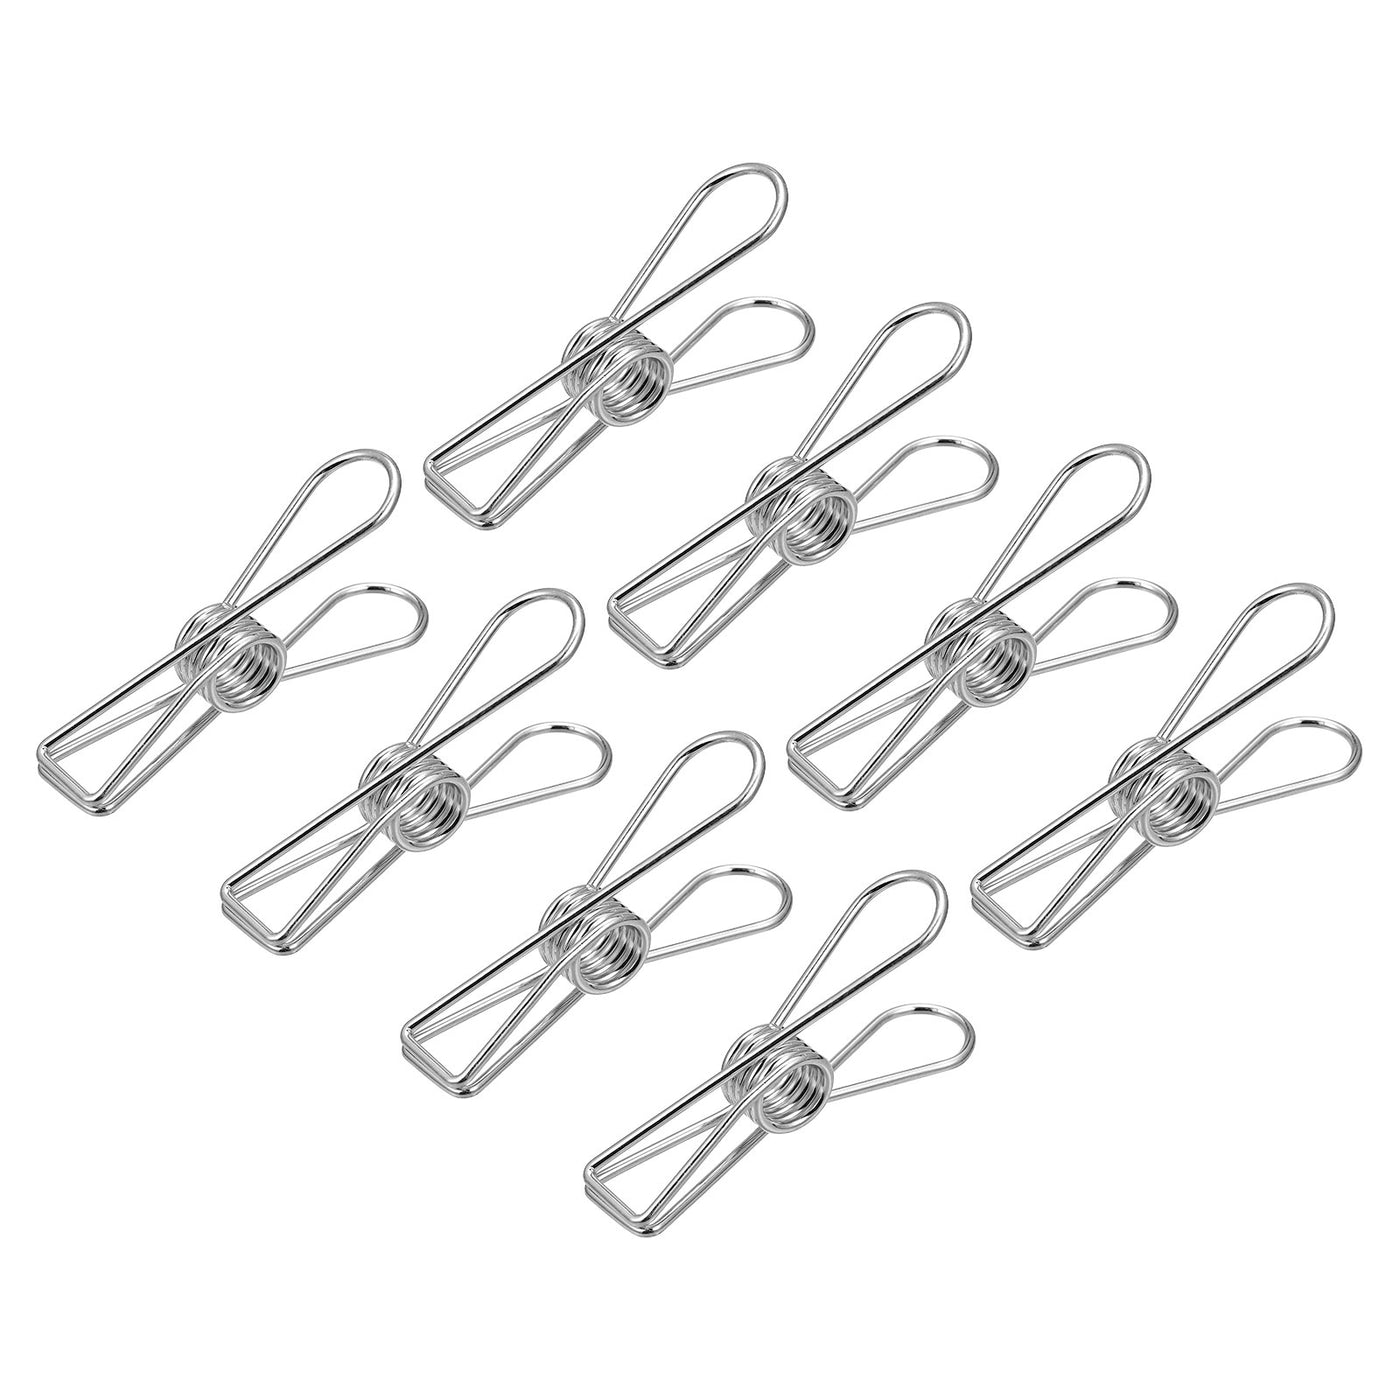 uxcell Uxcell Tablecloth Clips, 70mm Carbon Steel Clamps for Fix Table Cloth, Silver 16 Pcs